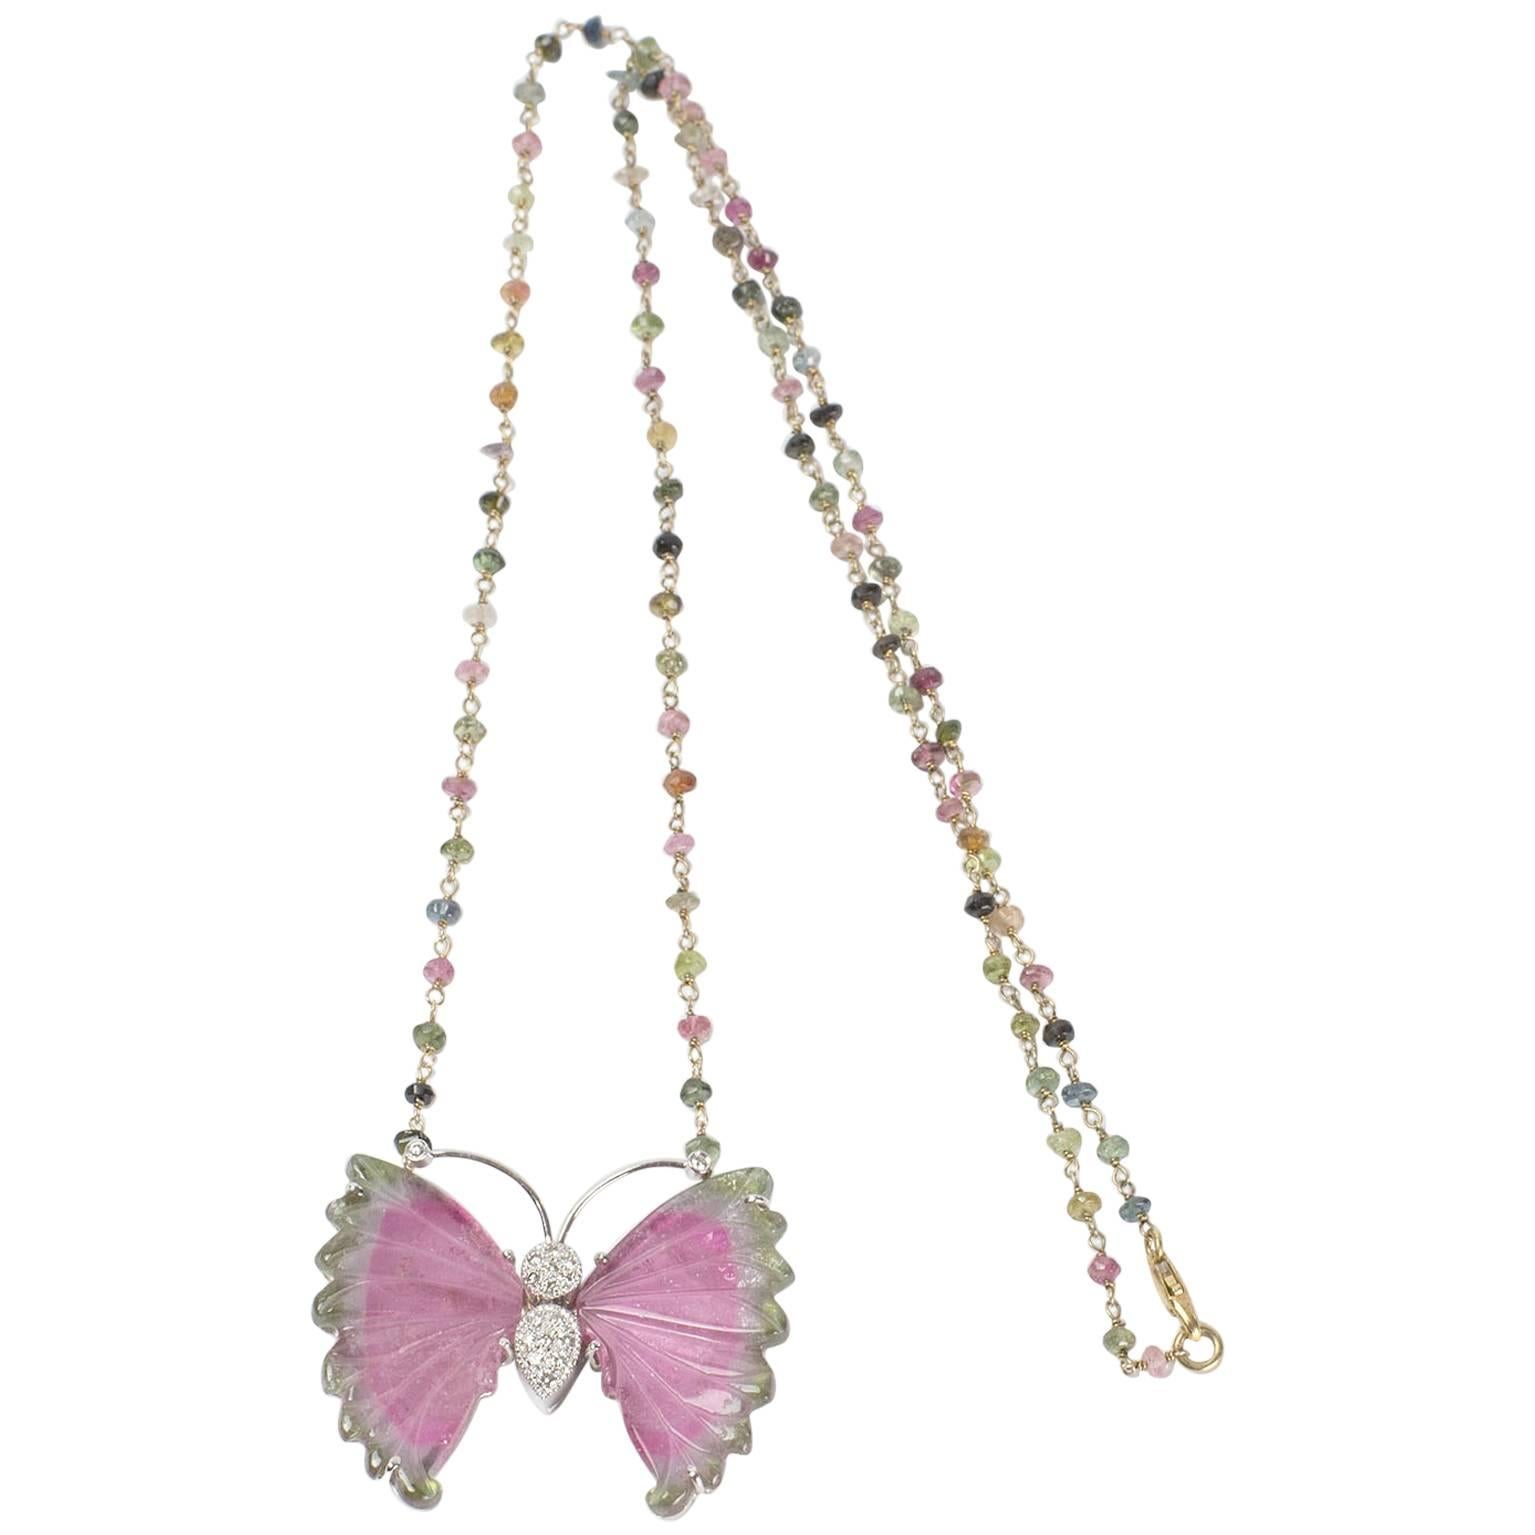 Multi-colored facet-cut Tourmaline rondelles hand-linked gilt S/S chain suspending a fabulous Butterfly with hand carved green and pink Tourmaline wings and pave set Diamond body. Beautifully hand crafted in 14k gold. This Chic necklace, Fabulous as